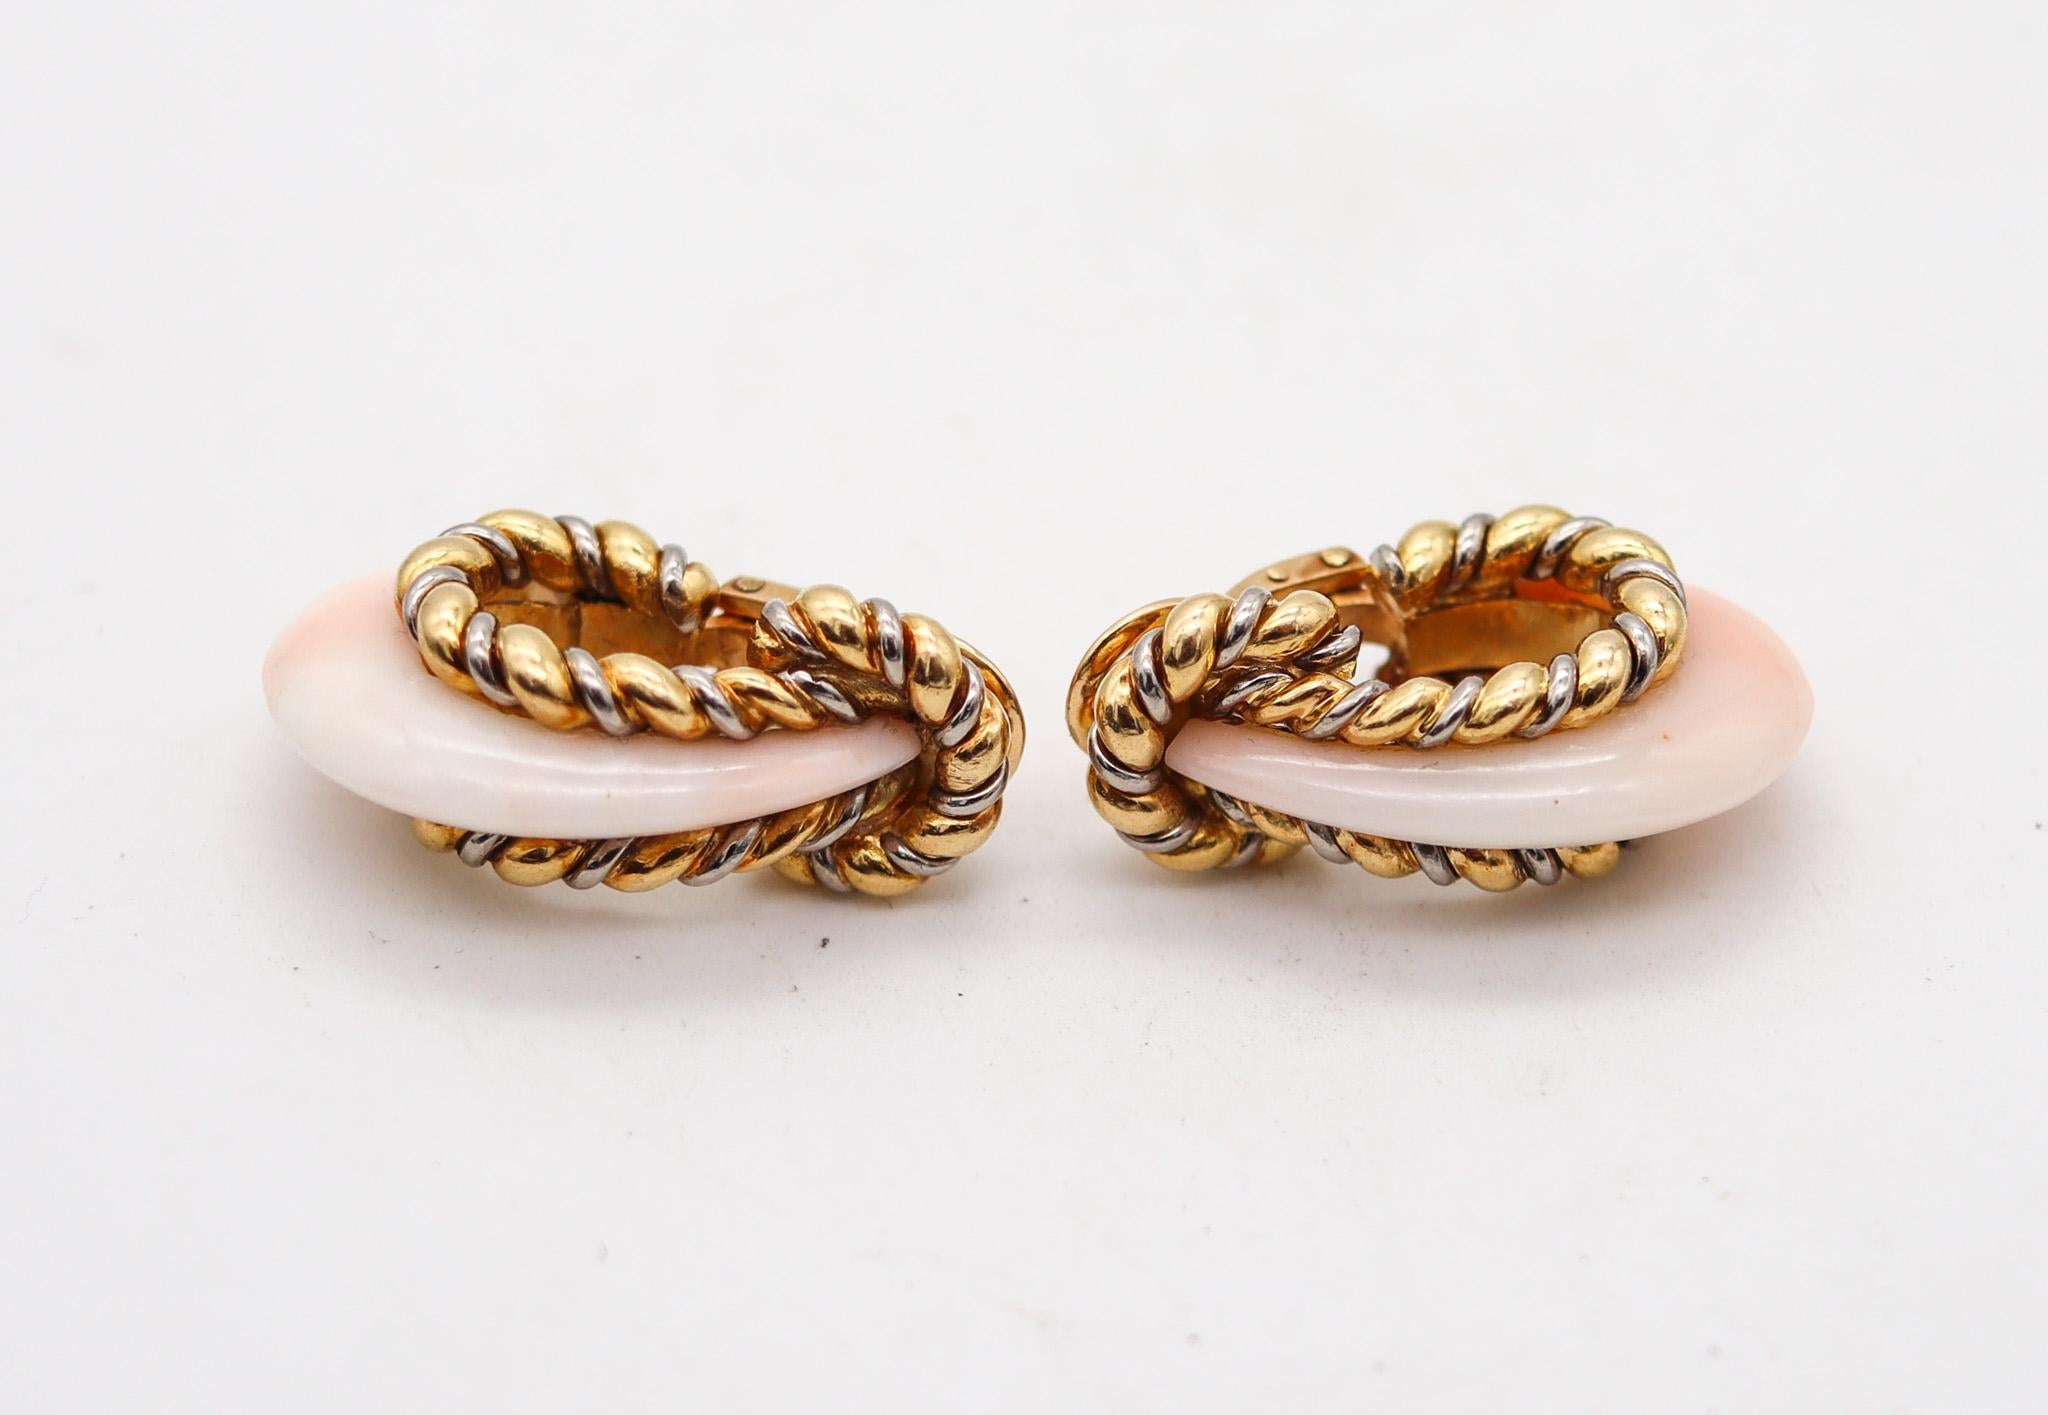 Hoop earrings with corals designed by Fred of Paris.

Fabulous pair of clips earrings, created in Paris France by the jewelry house of Fred Joaillier, back in the 1970. These earrings has been made with classical fluted patterns by twisted wires